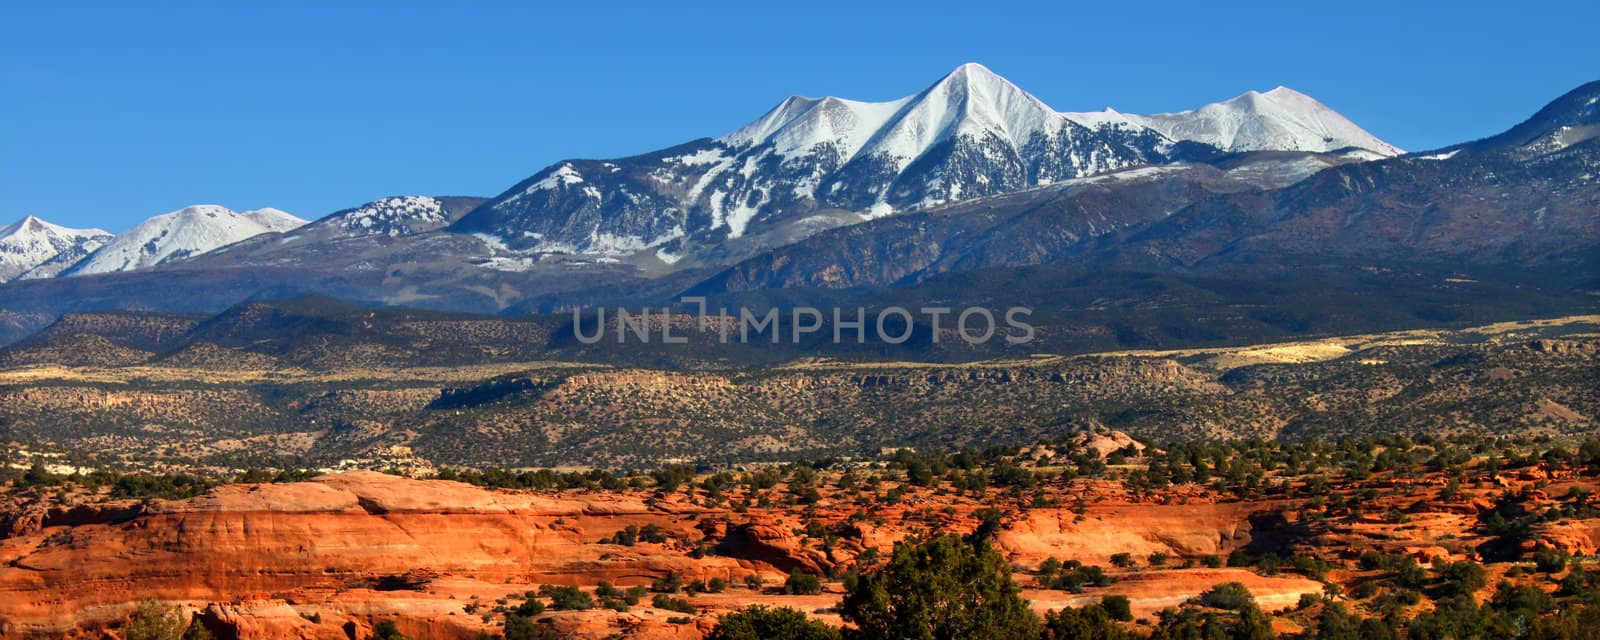 Monti-La Sal National Forest of Utah by Wirepec